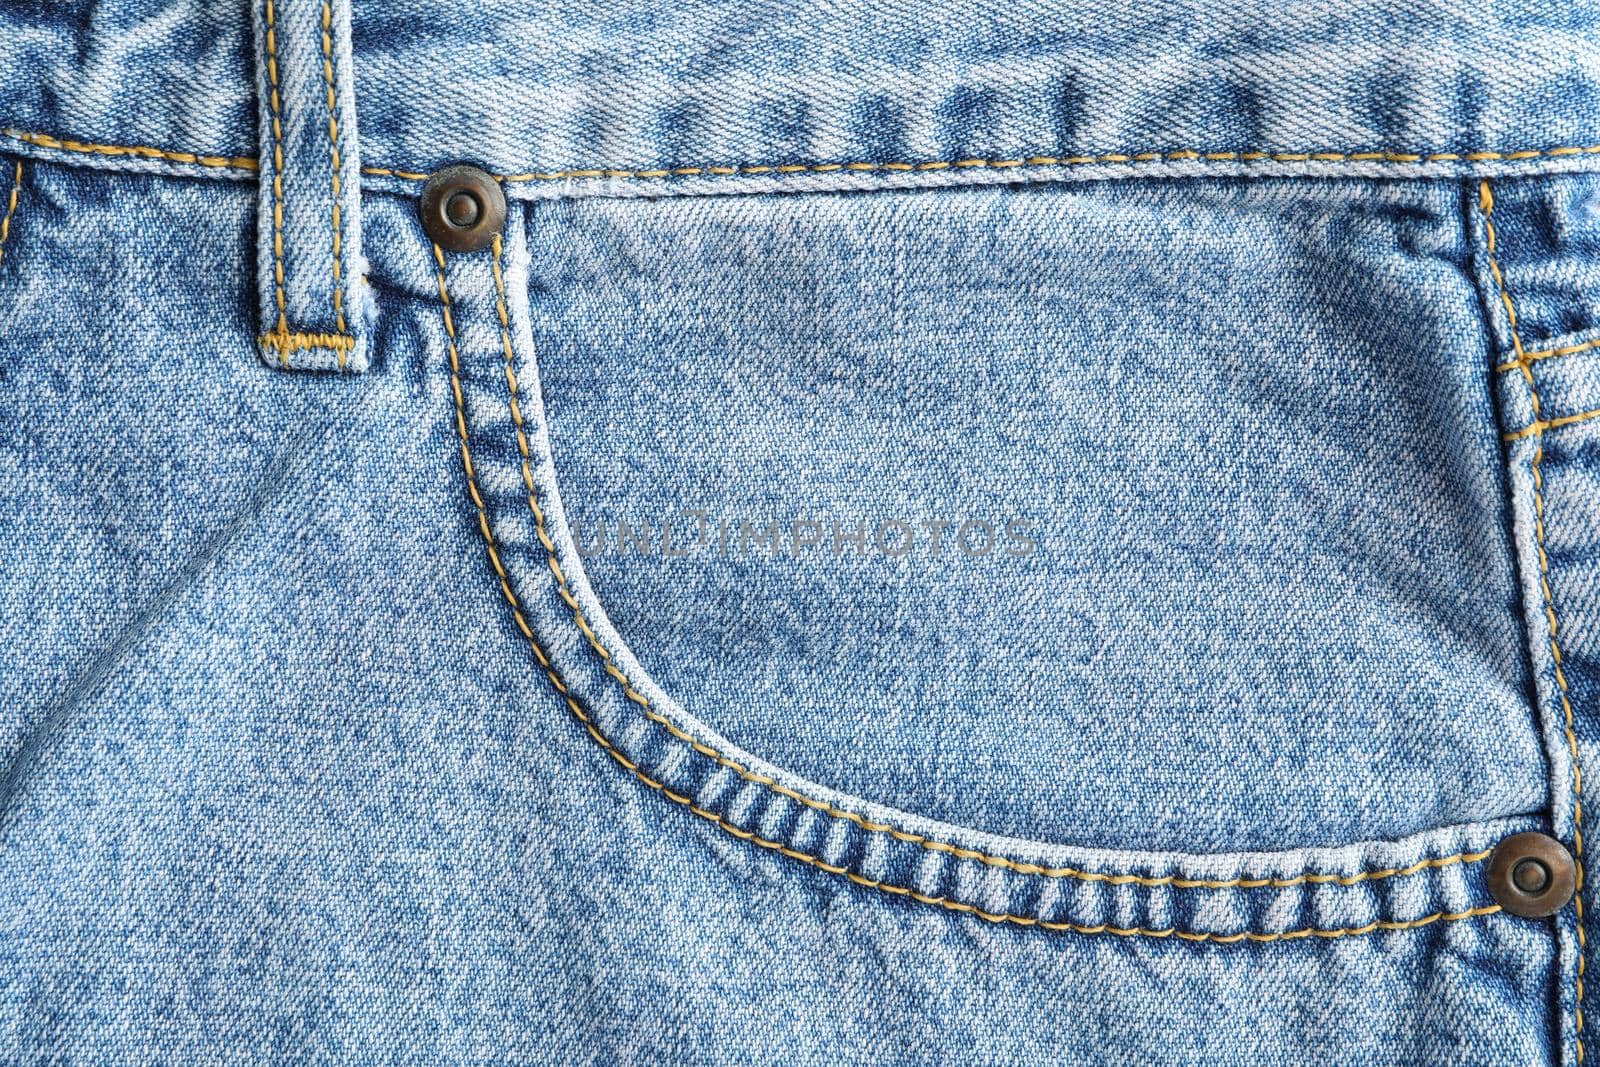 Classic jeans textured background, close up by AtlasCompany